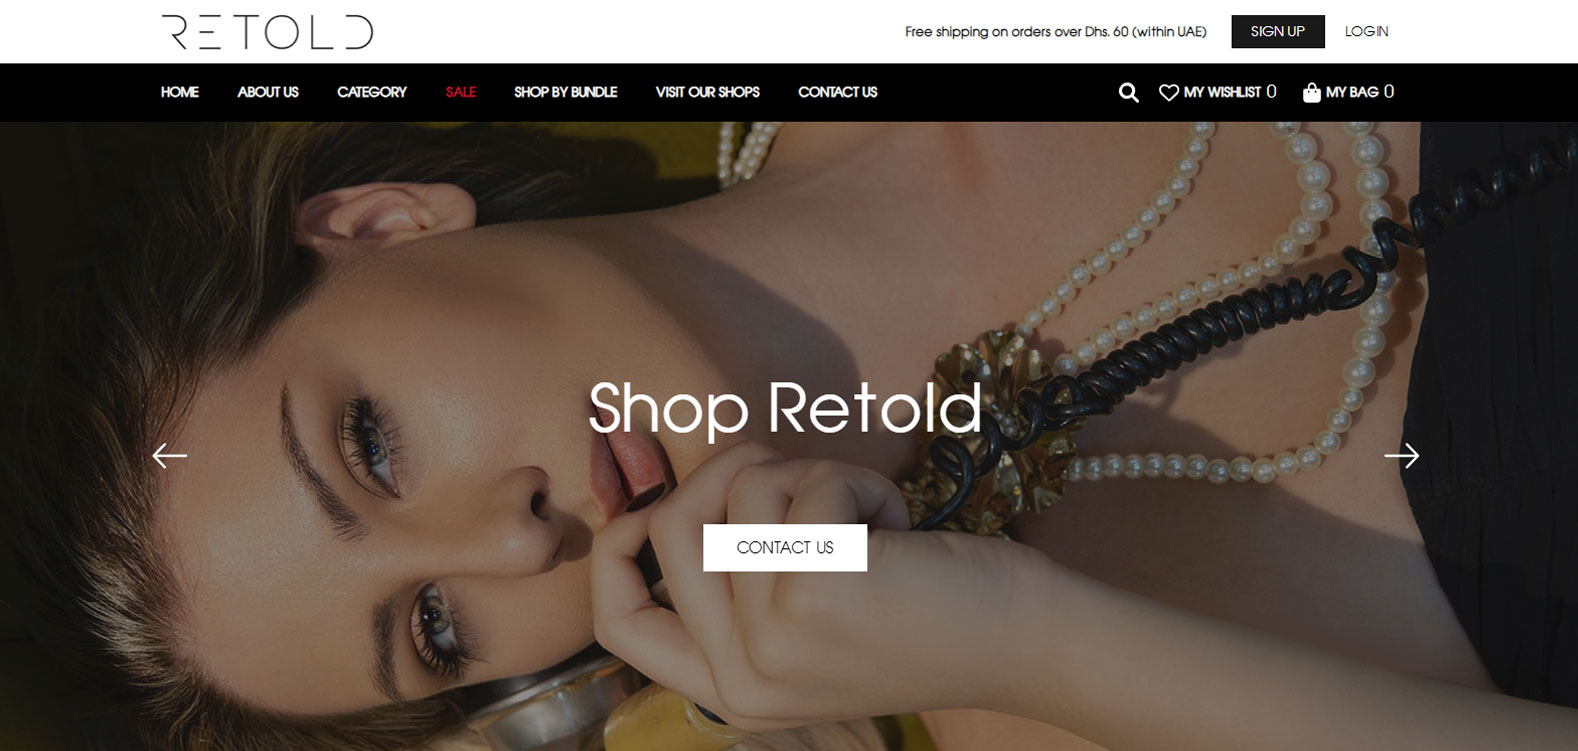 Retold: Dubai Shopping Online Websites For Used Products